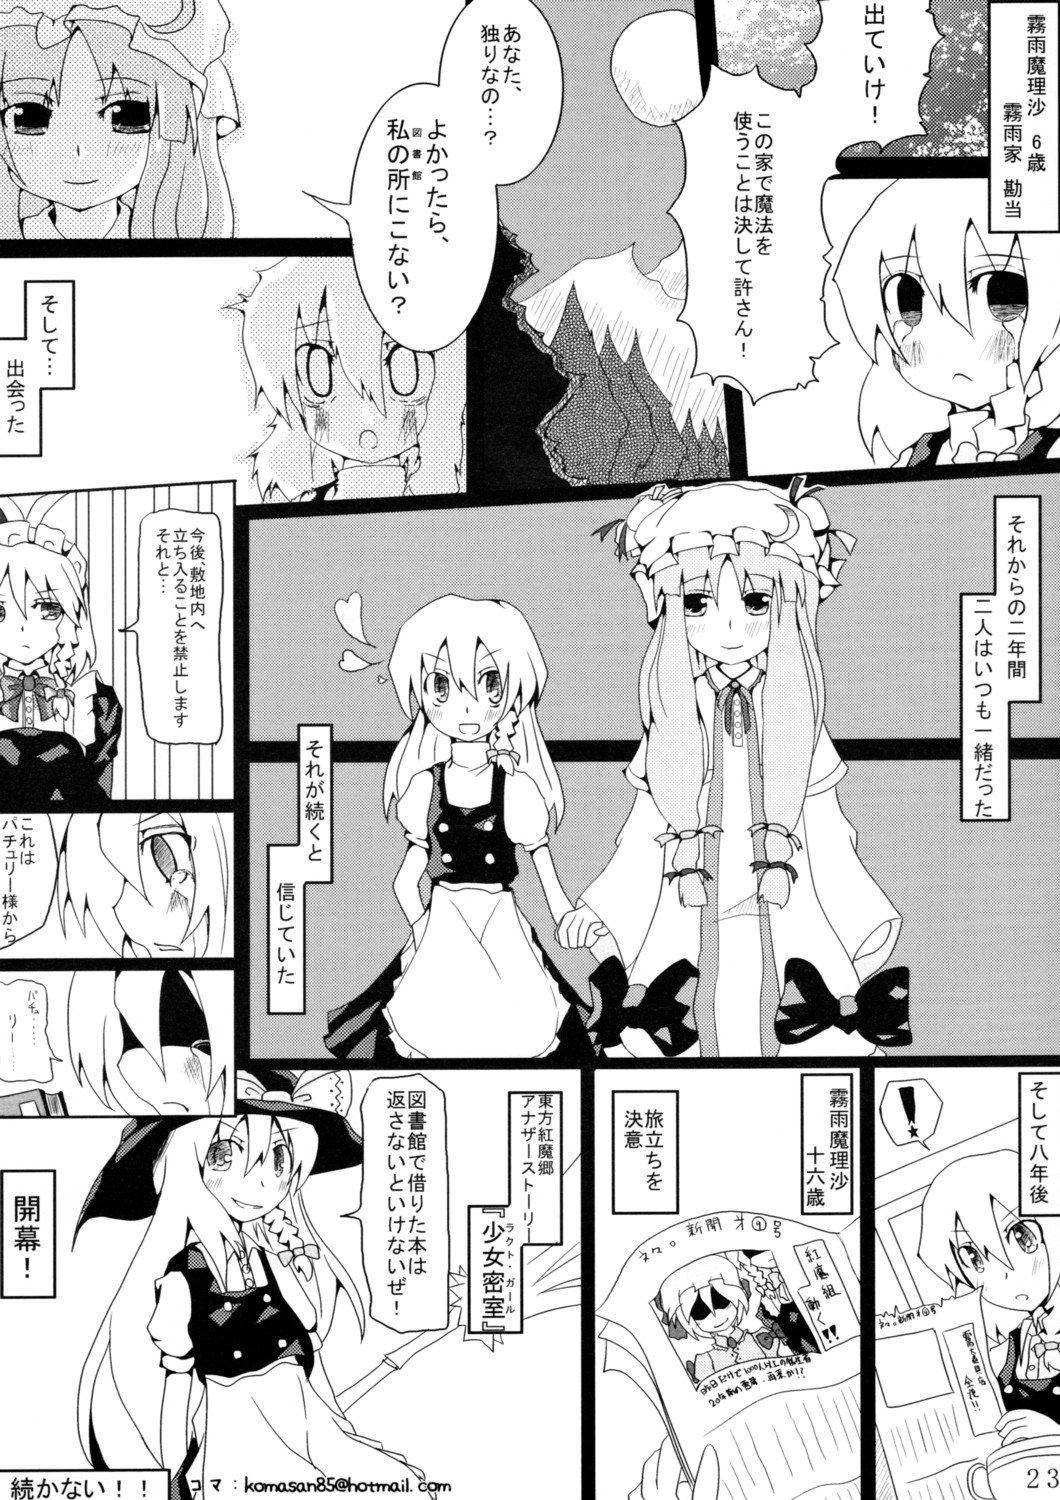 (Reitaisai 5) [Eclipse (Rougetu)] infinite loop (Touhou Project) page 23 full